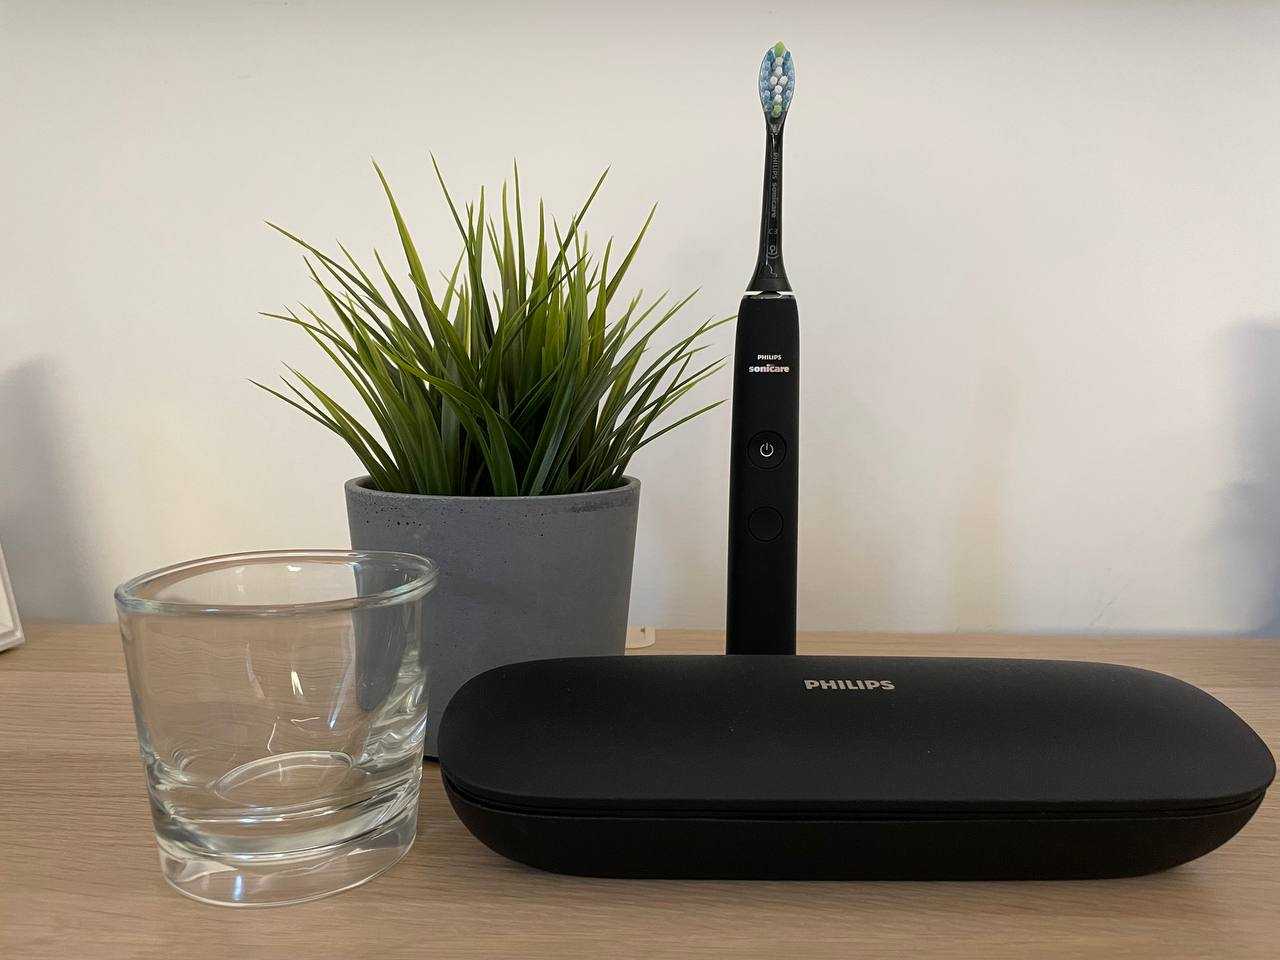 Philips Sonicare 9000 DiamondClean review: new levels of cleaning